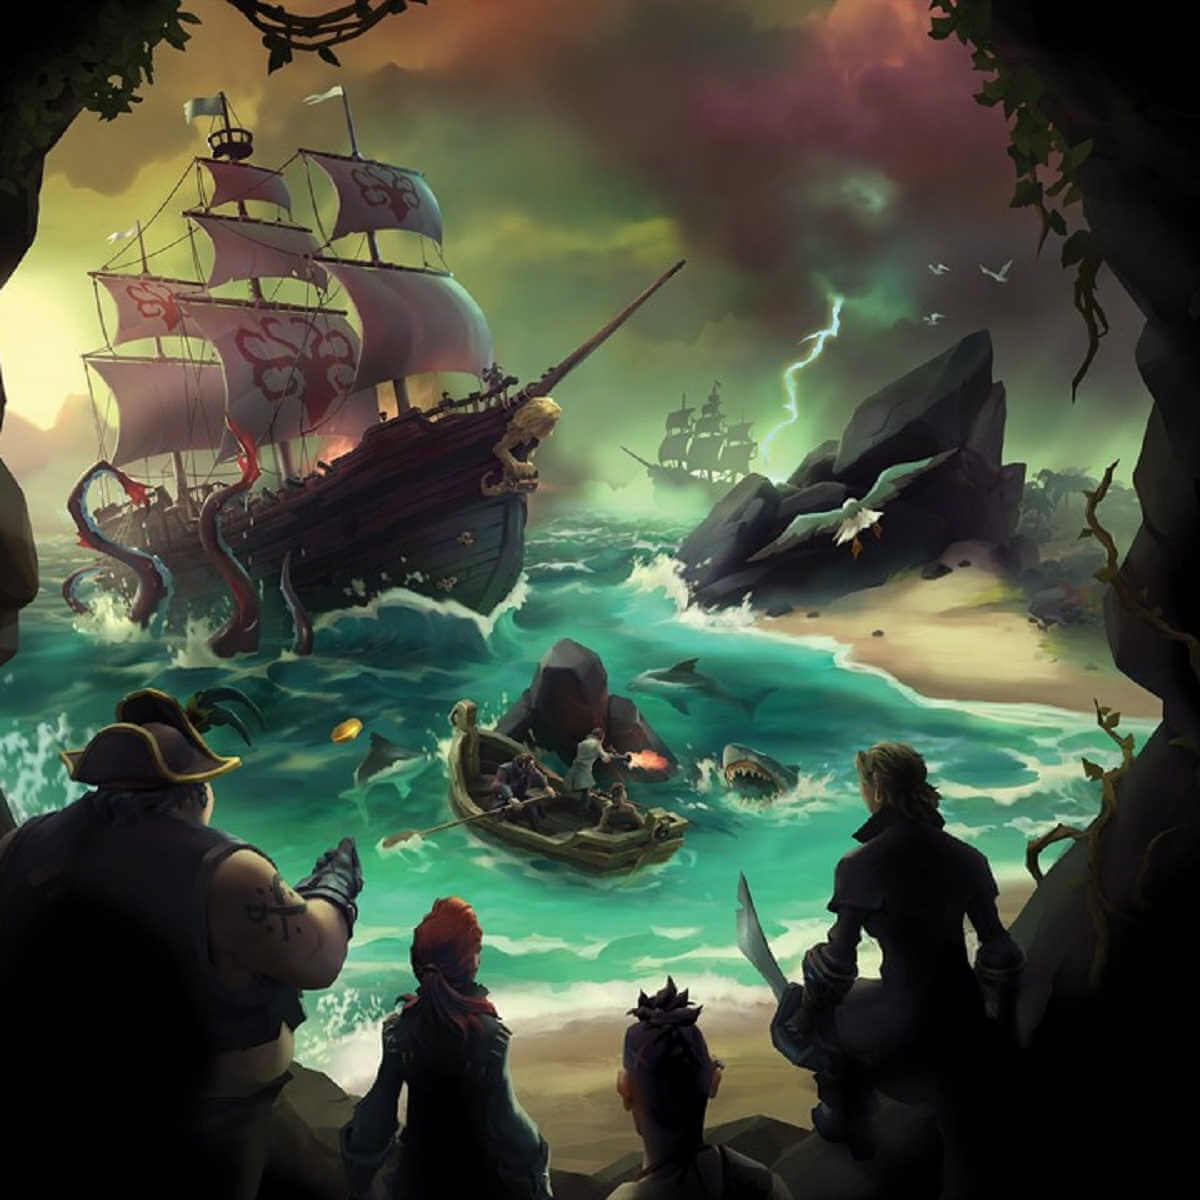 E3 Sea of Thieves prize is waiting for you in the Equipment Chest